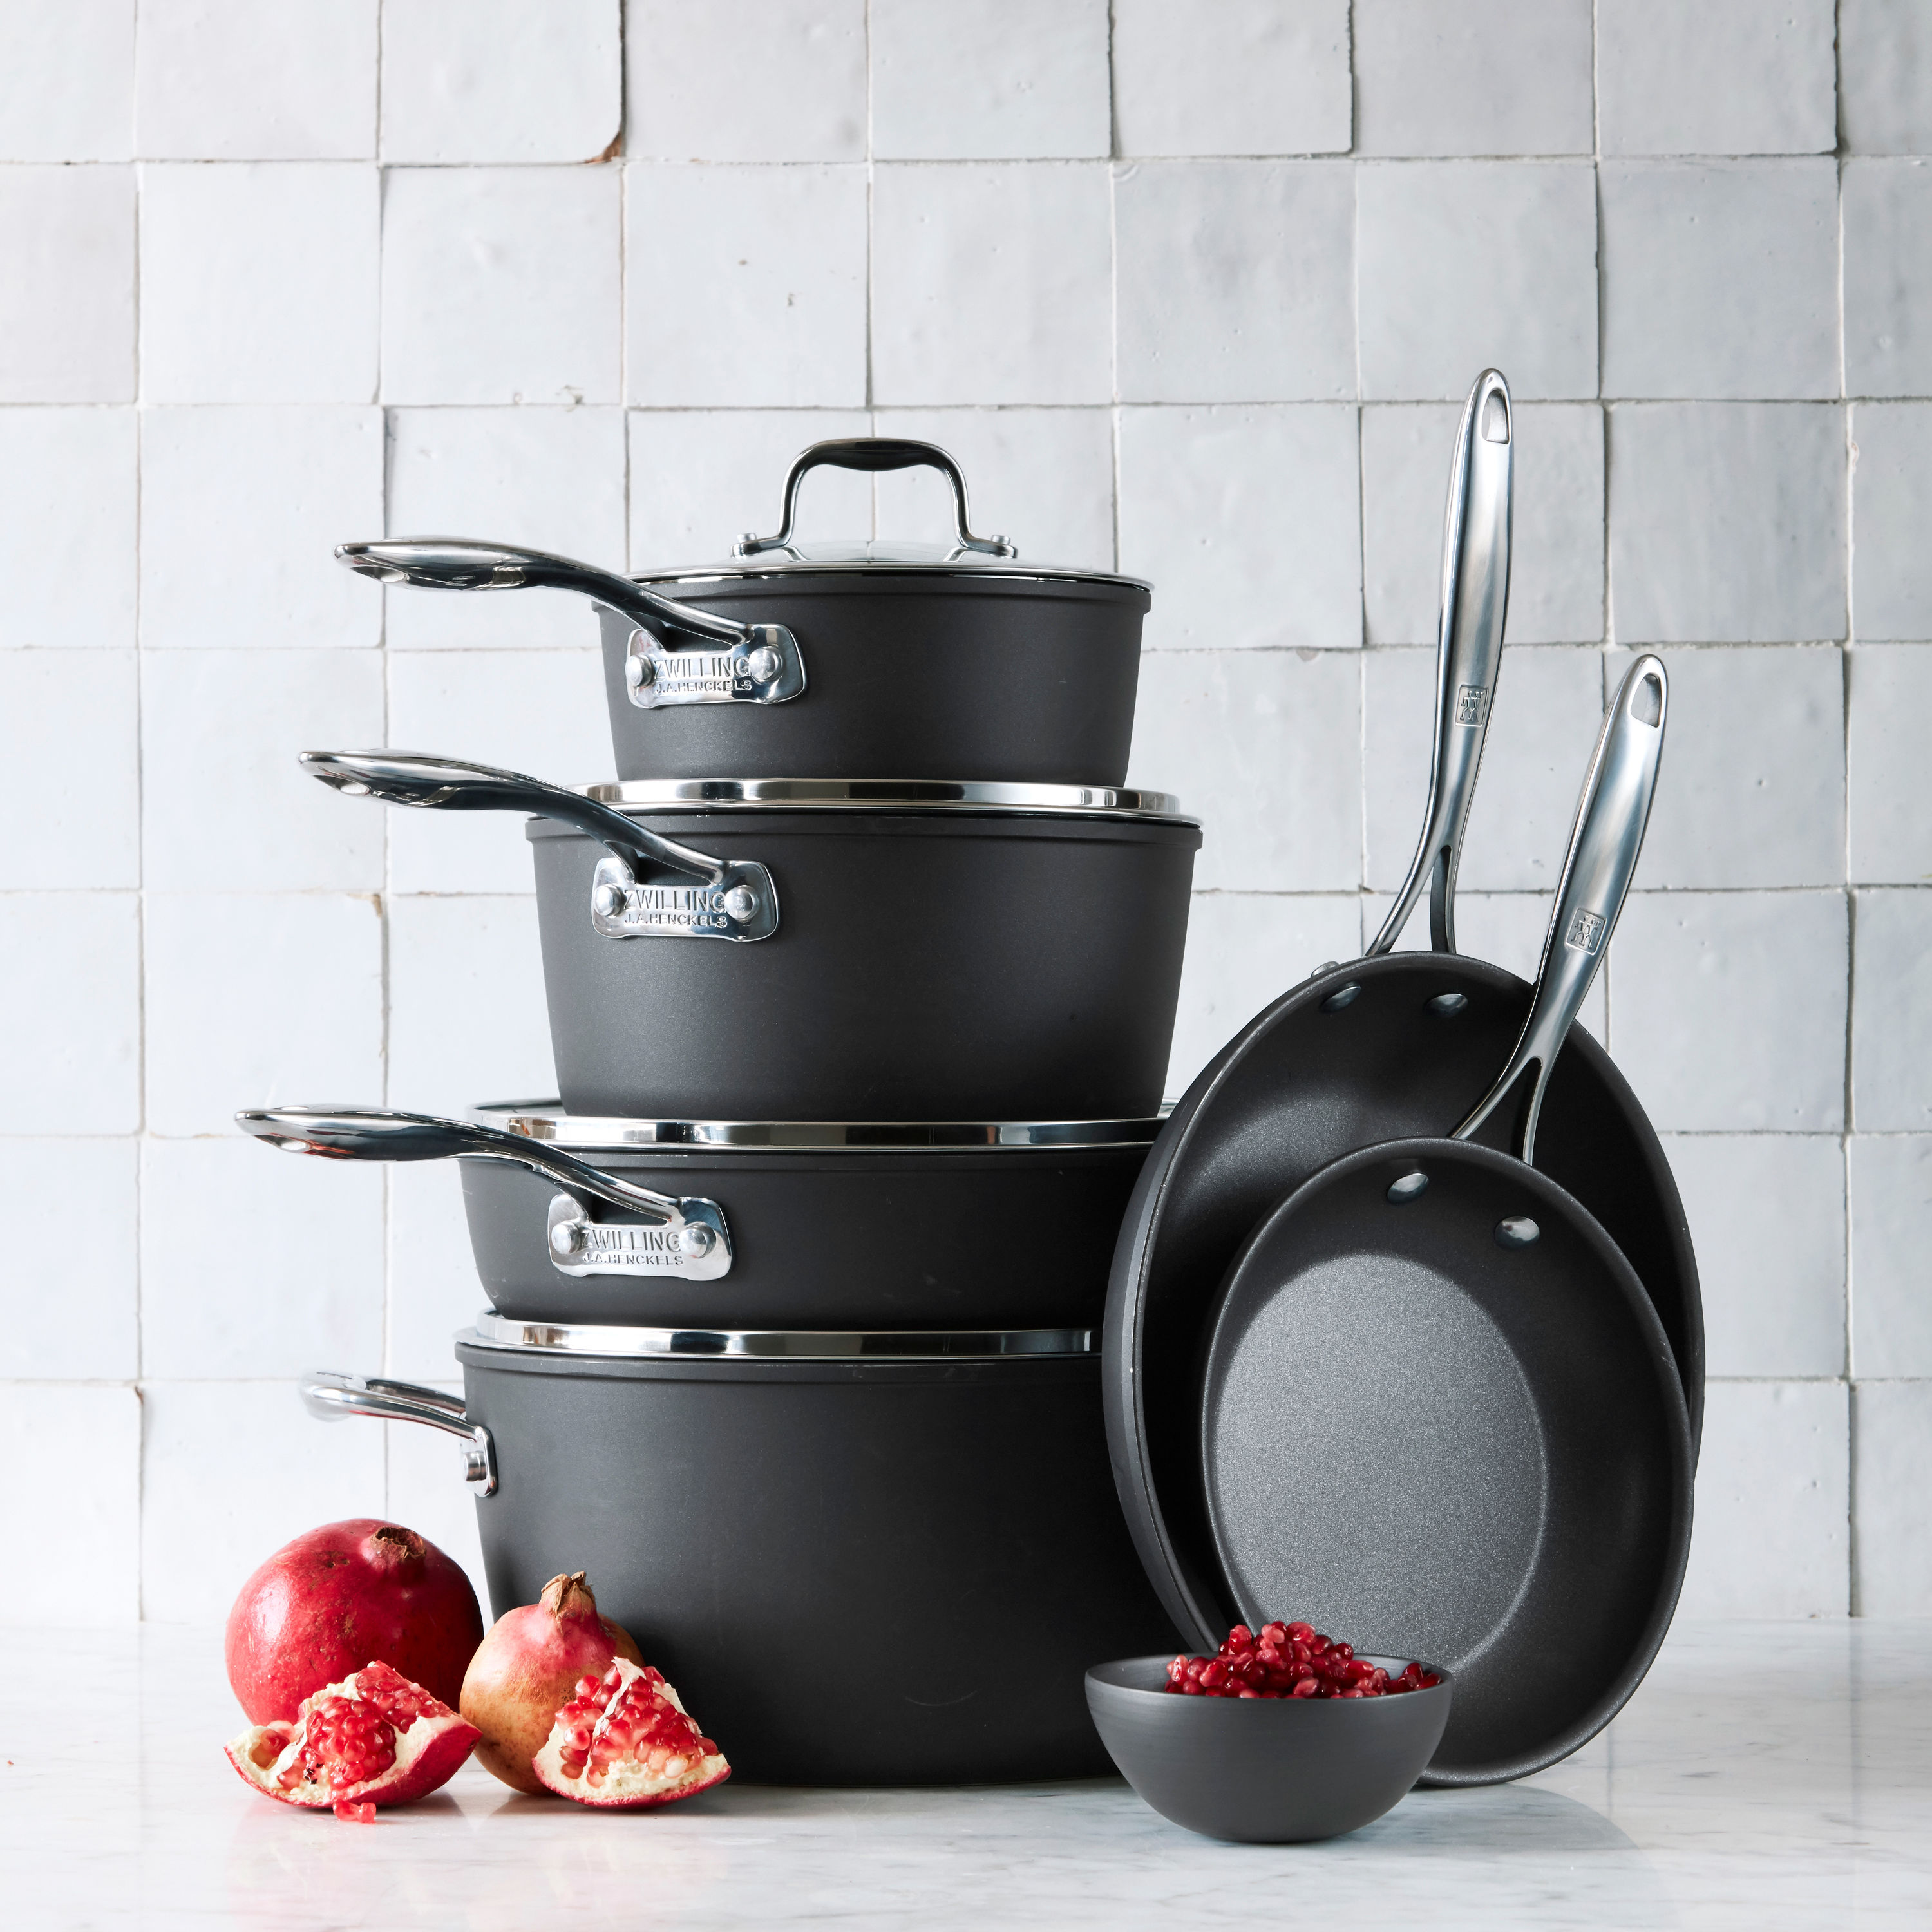 Buy ZWILLING Forte Pots and pans set